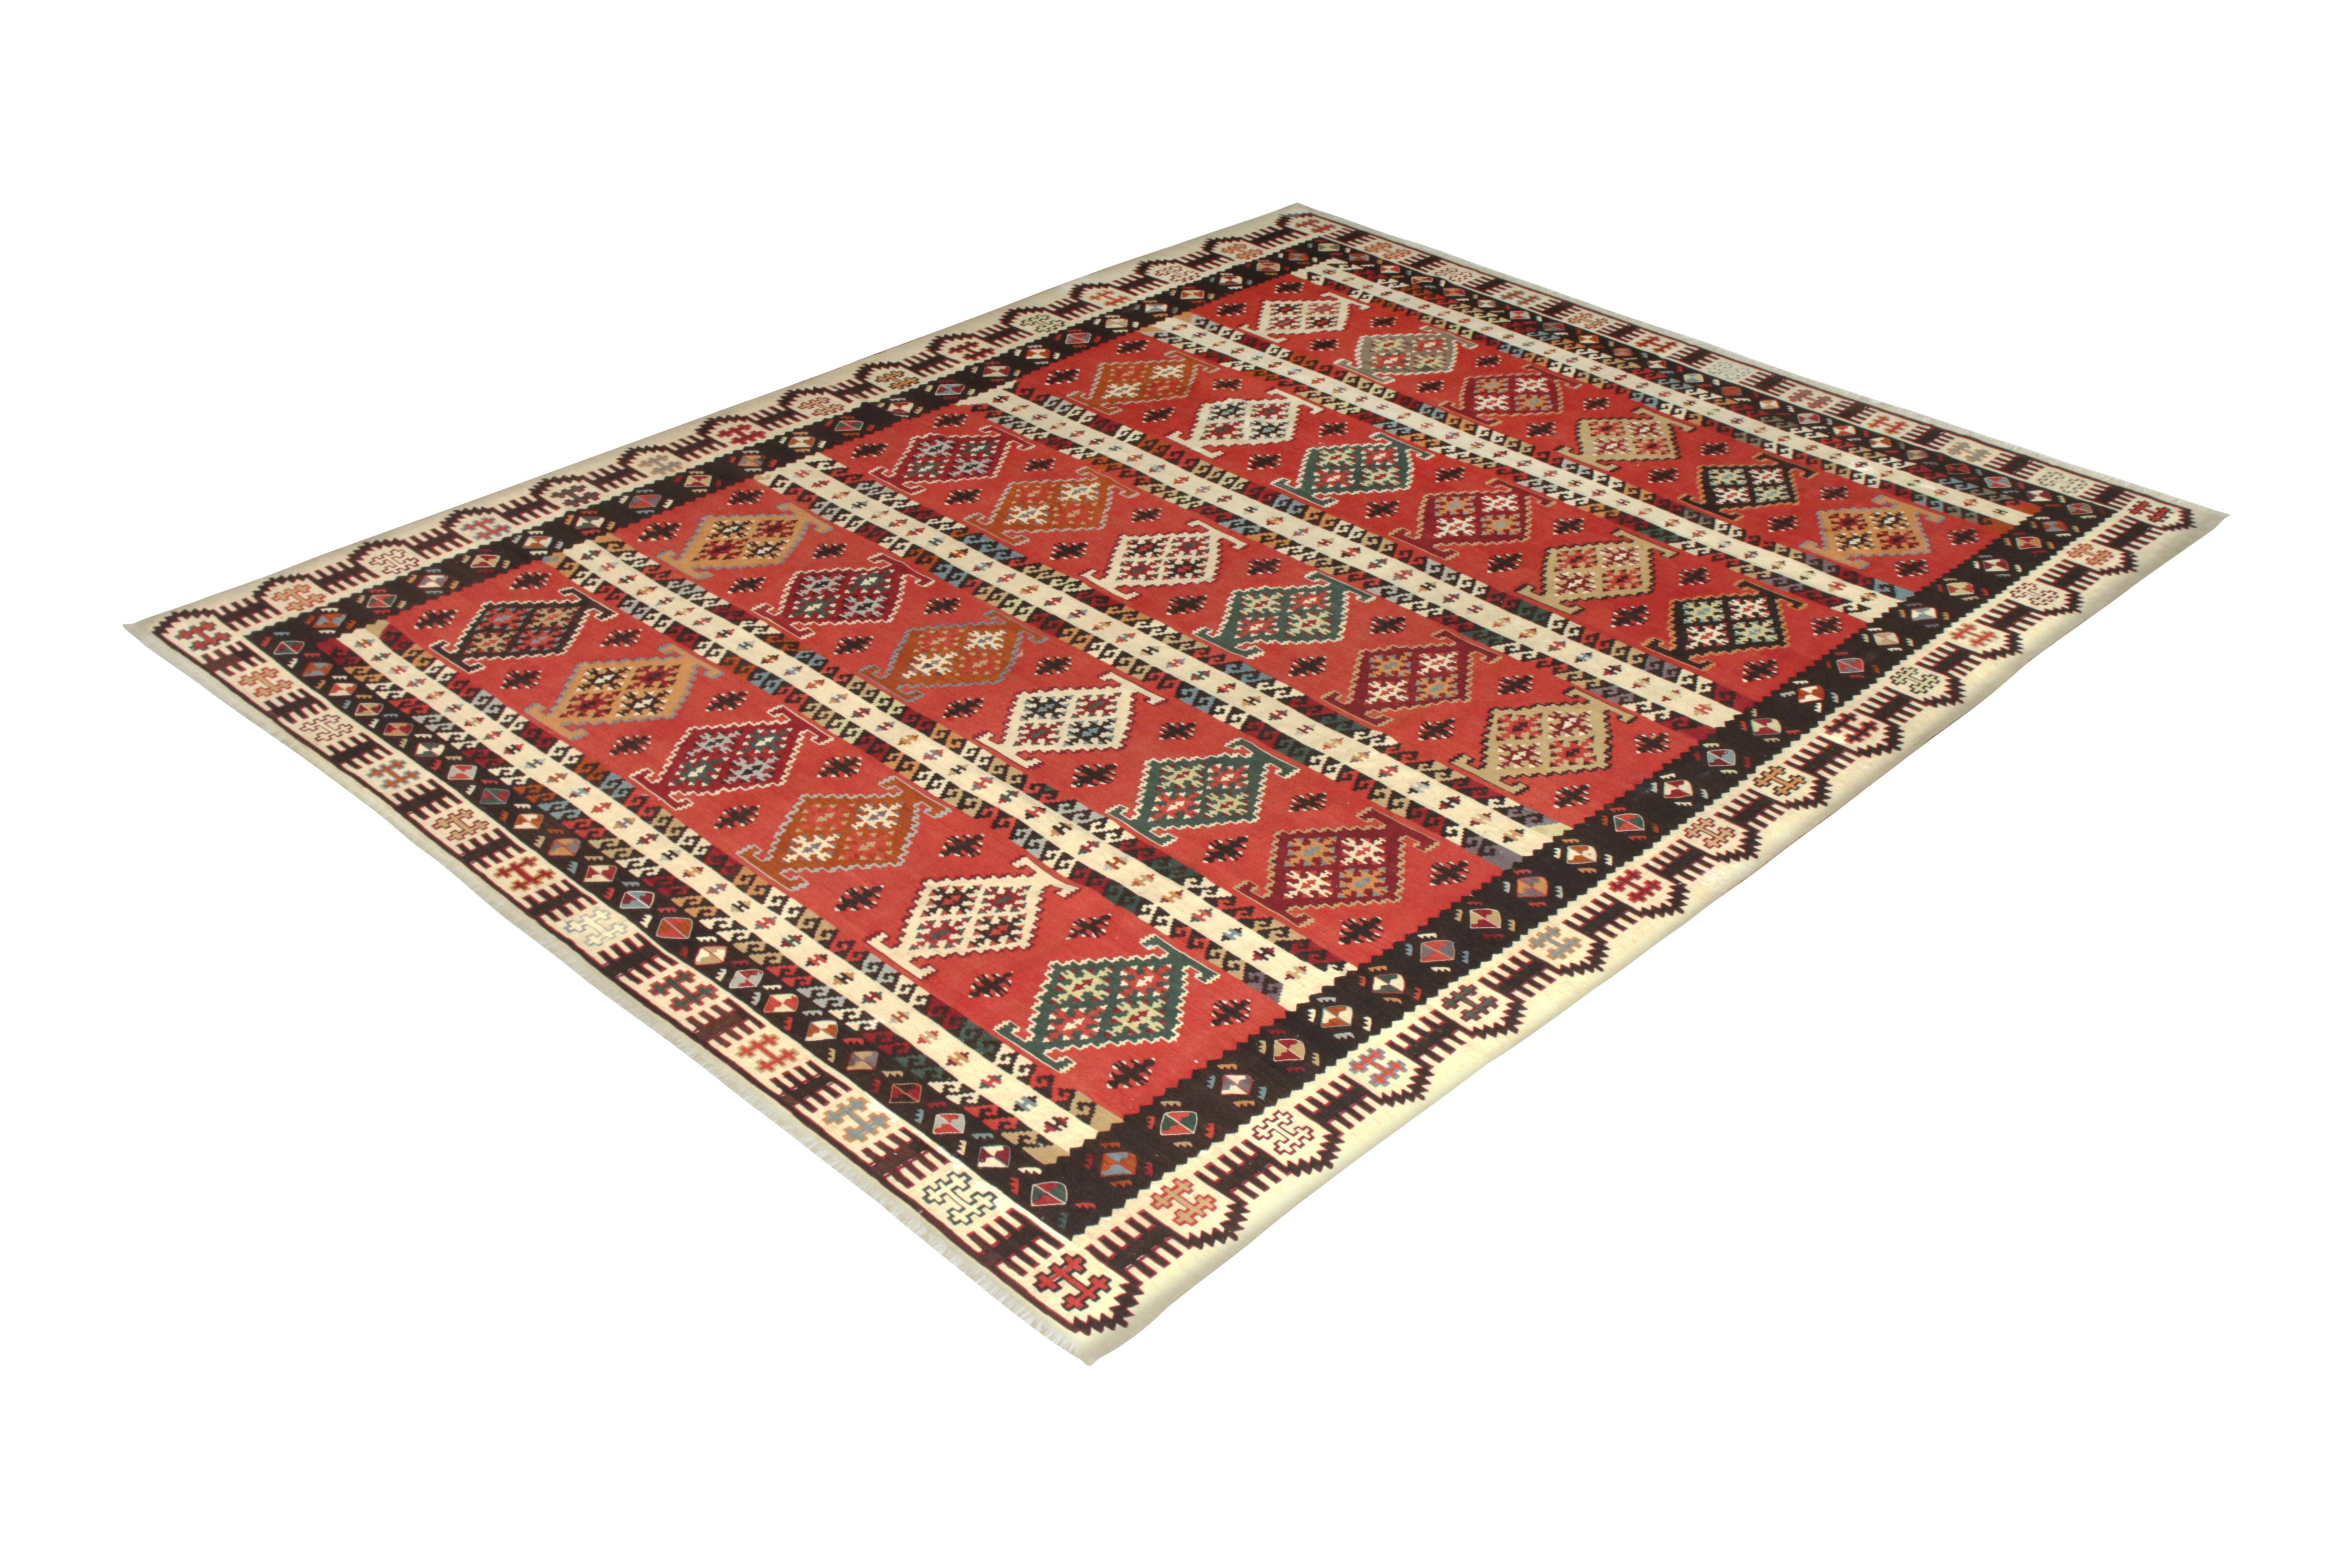 Handwoven in a wool flat-weave originating from Turkey circa 1950-1960, this vintage Kilim rug enjoys the culmination of spacious 9 x 11 size, a rich play of red and beige-brown tribal colorways, and a regal approach to the geometric all-over